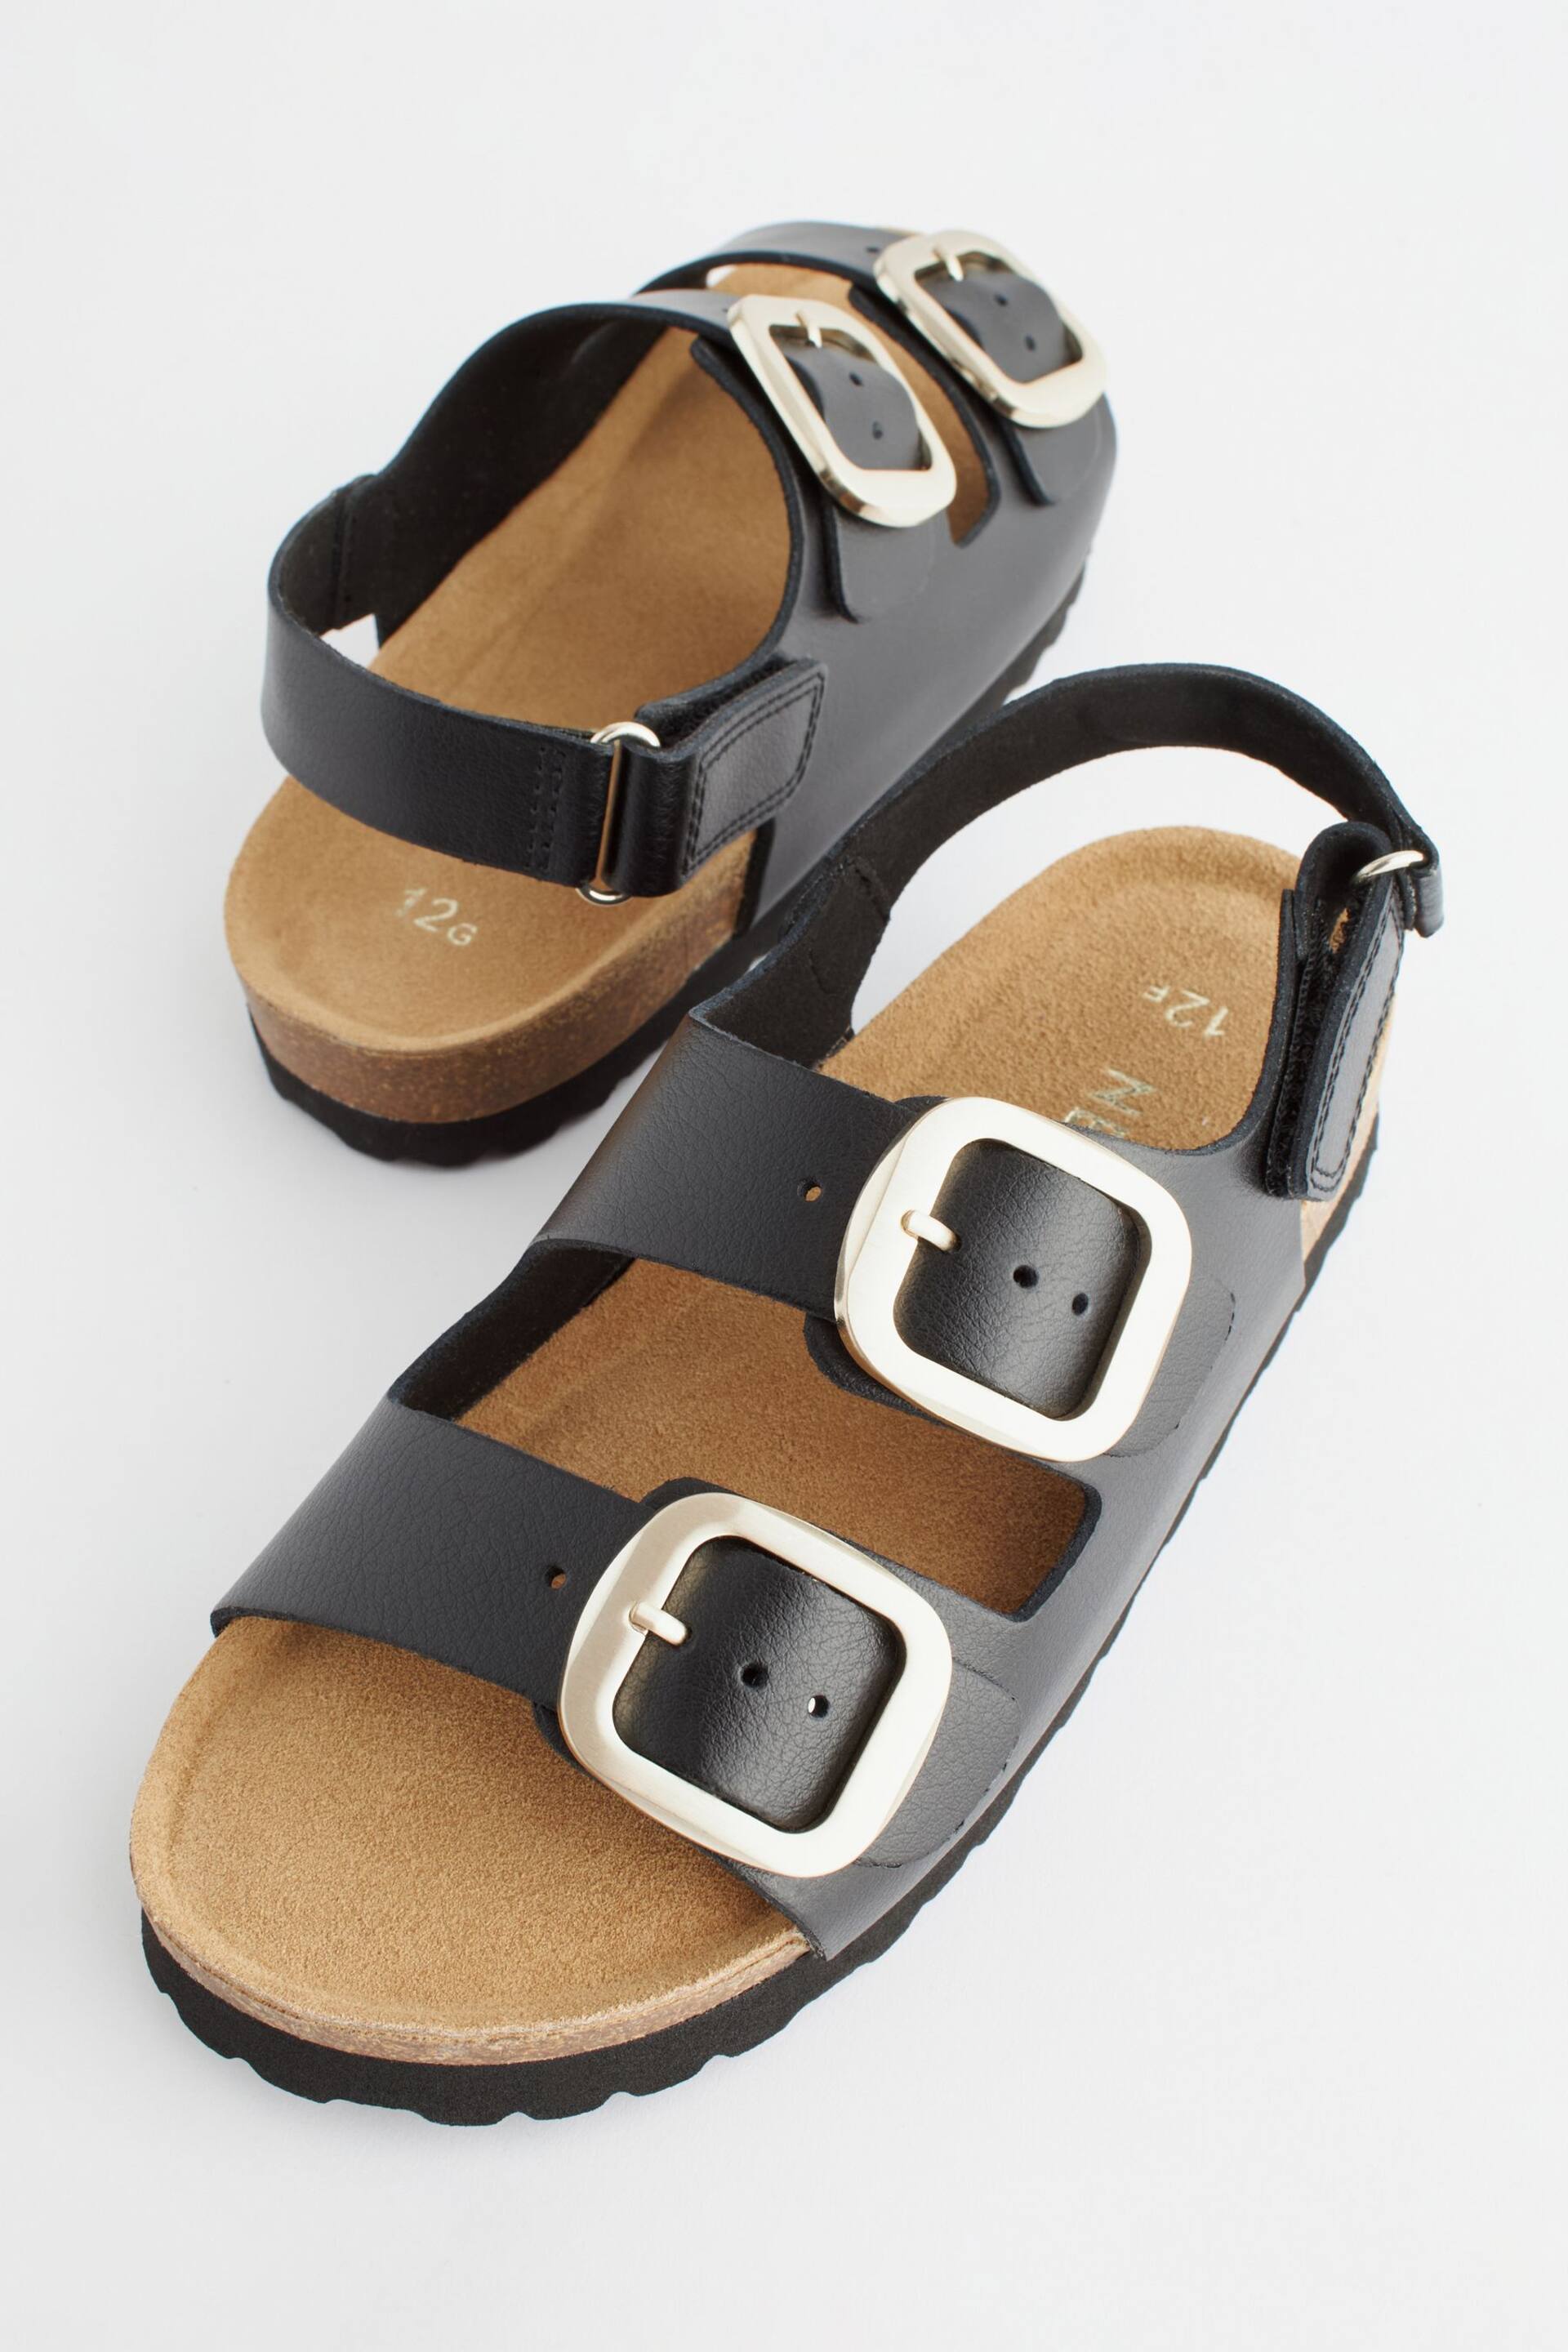 Black Leather Standard Fit (F) Two Strap Corkbed Sandals - Image 6 of 8